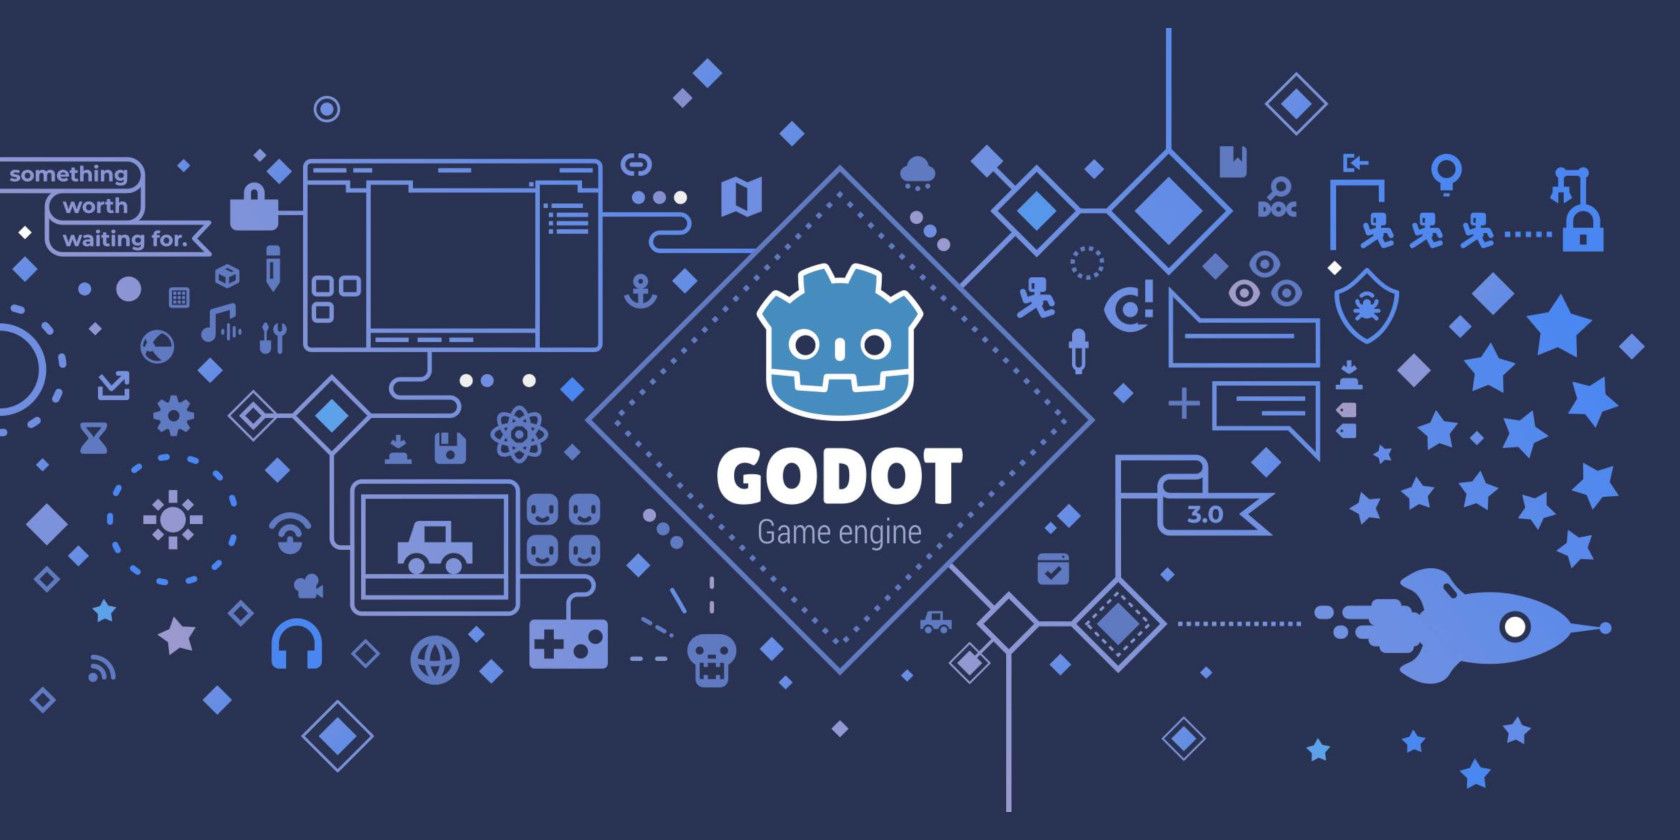 Godot Cover Image with Icons